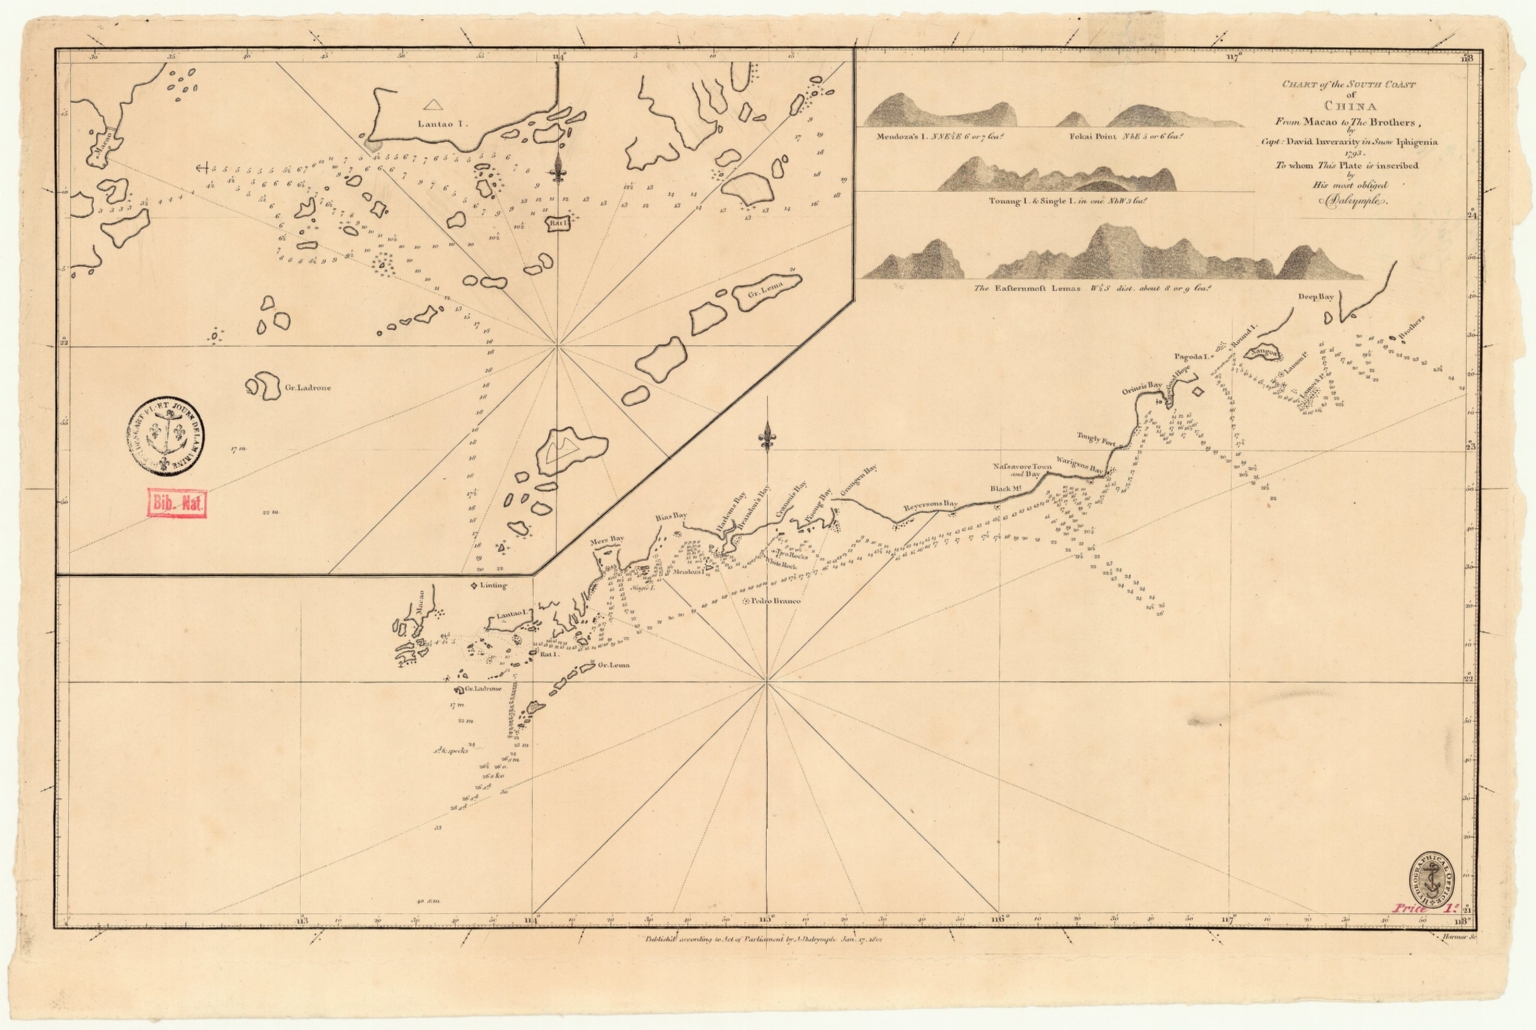 Chart of the south coast of China from Macao to The Brothers